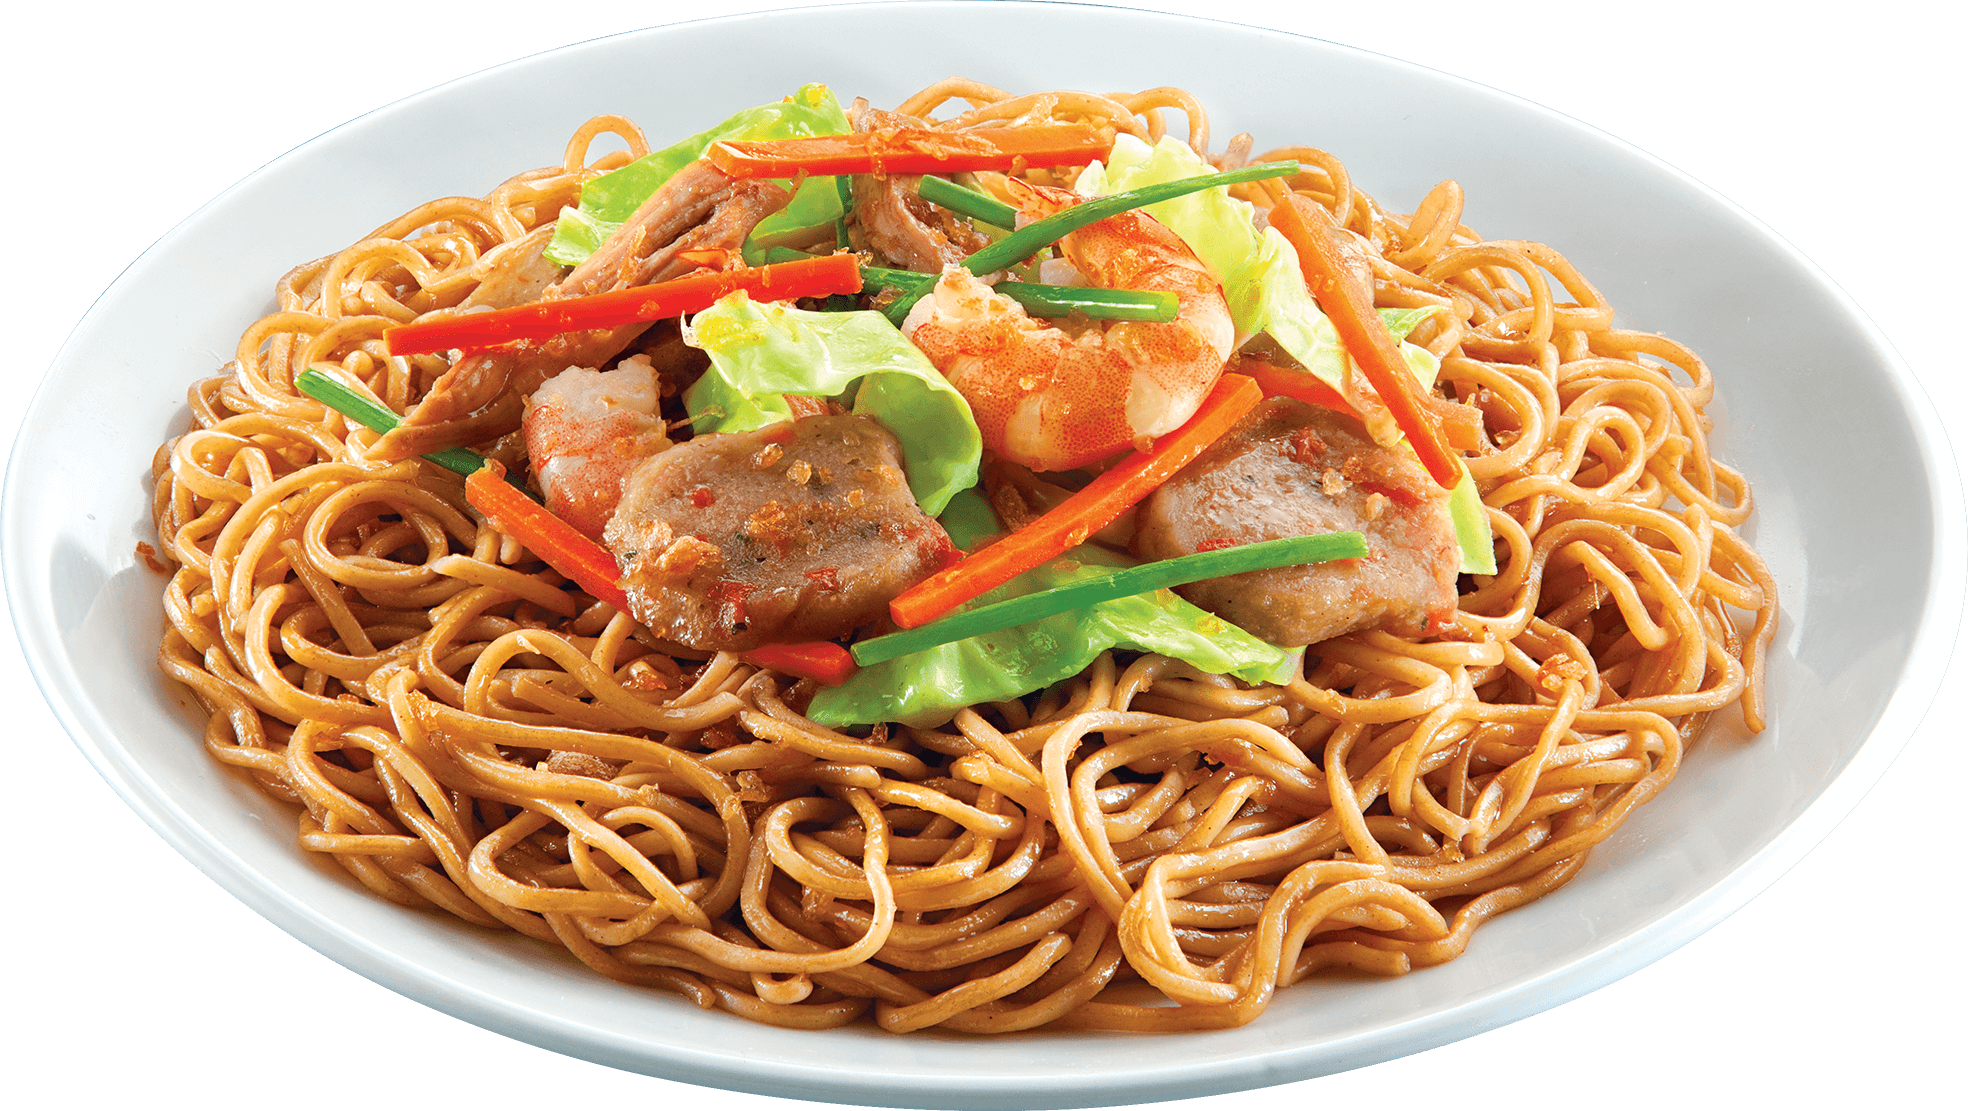 A Plate Of Noodles With Shrimp And Vegetables